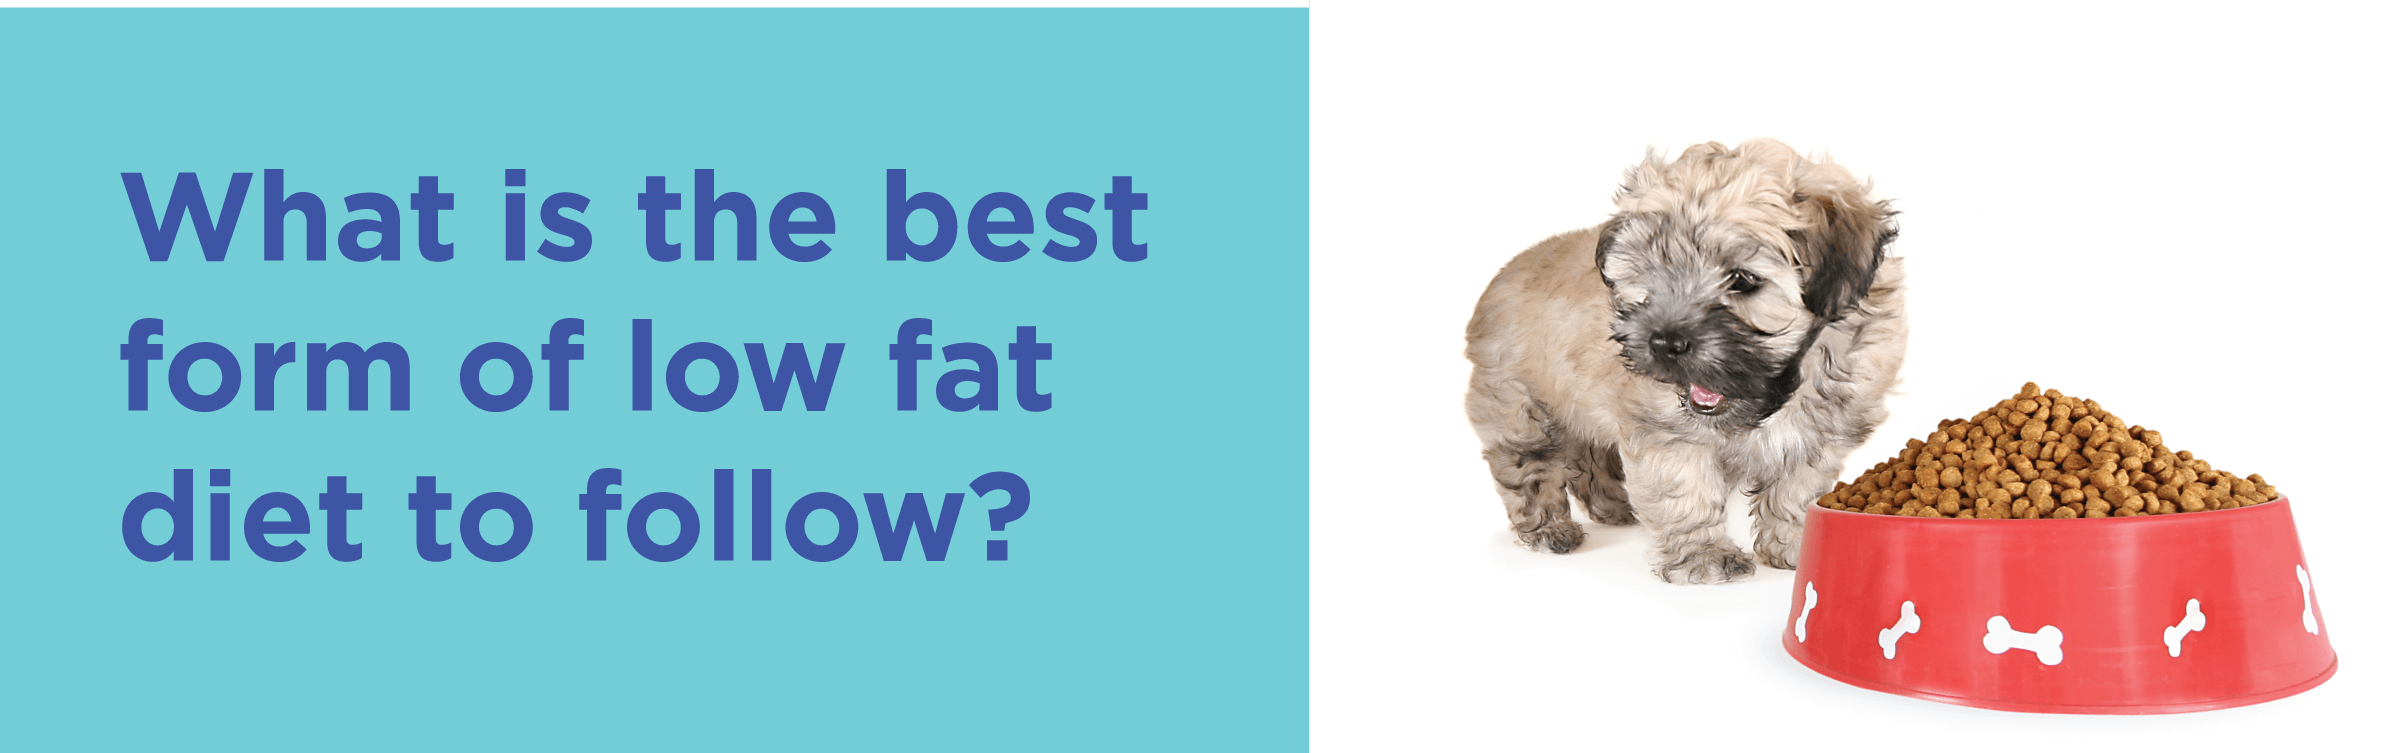 What is the best form of low fat diet